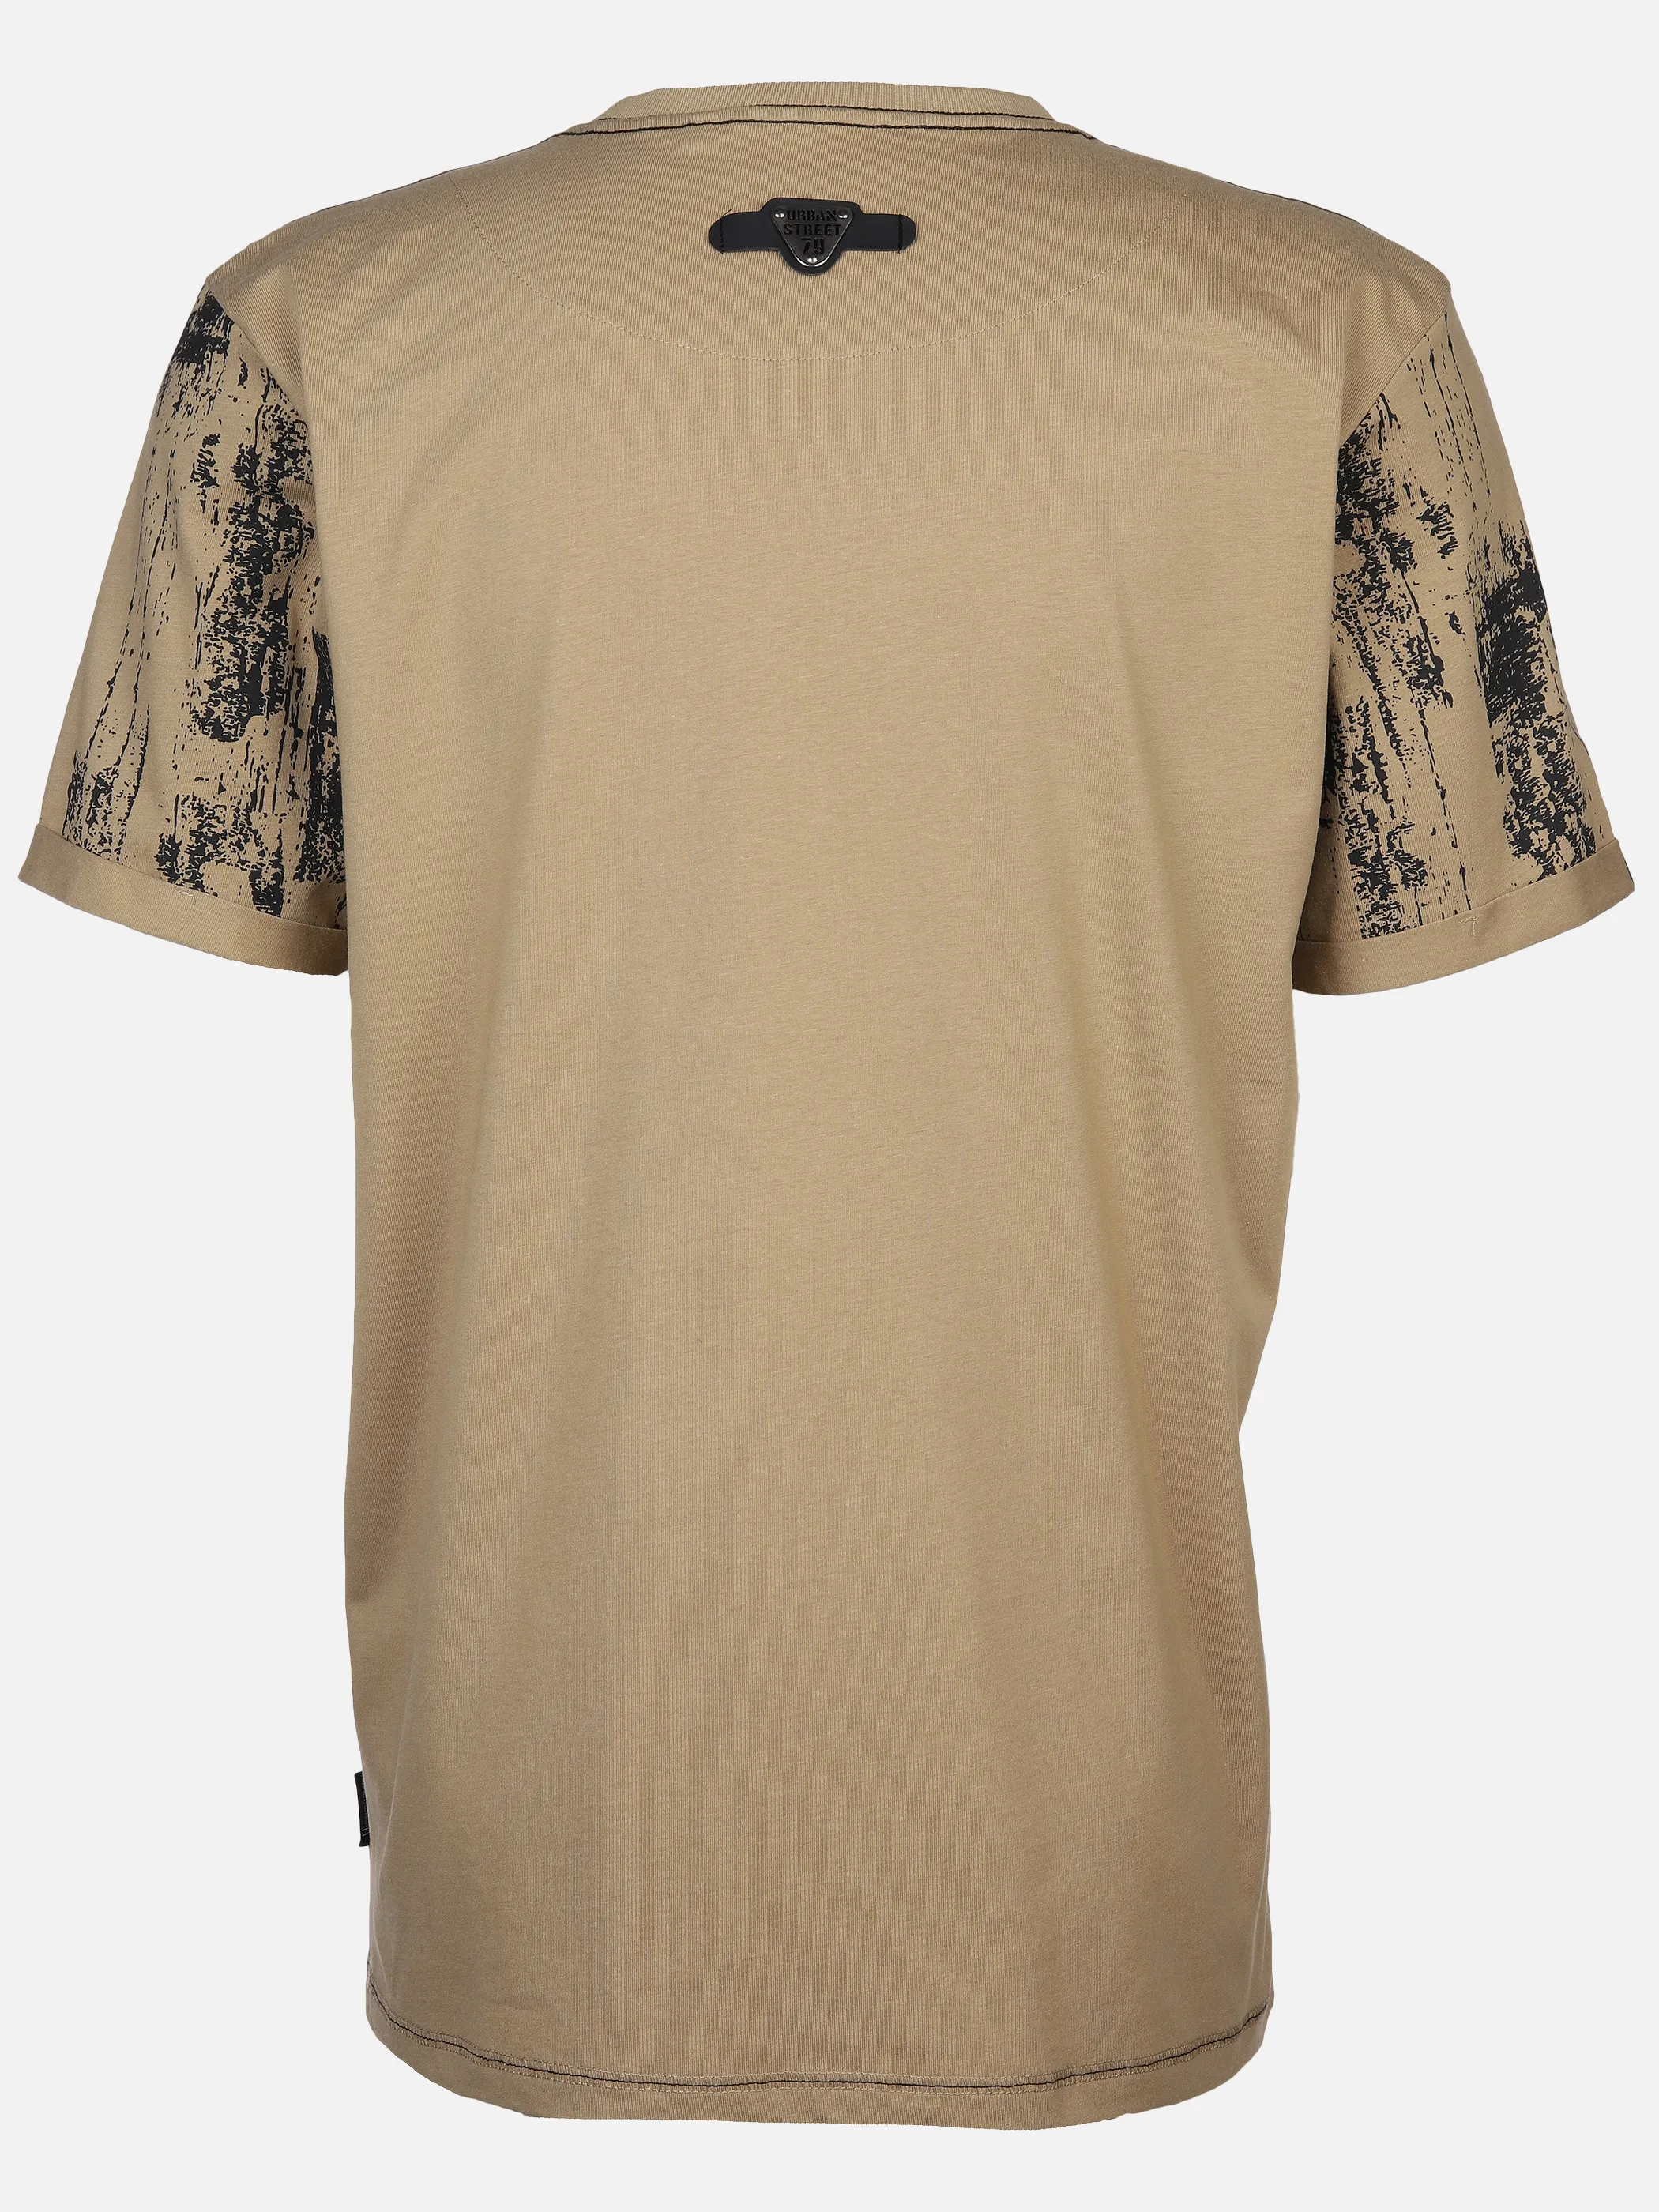 Southern Territory He- T-Shirt 1/2 Arm allover Braun 893221 CAMEL 2